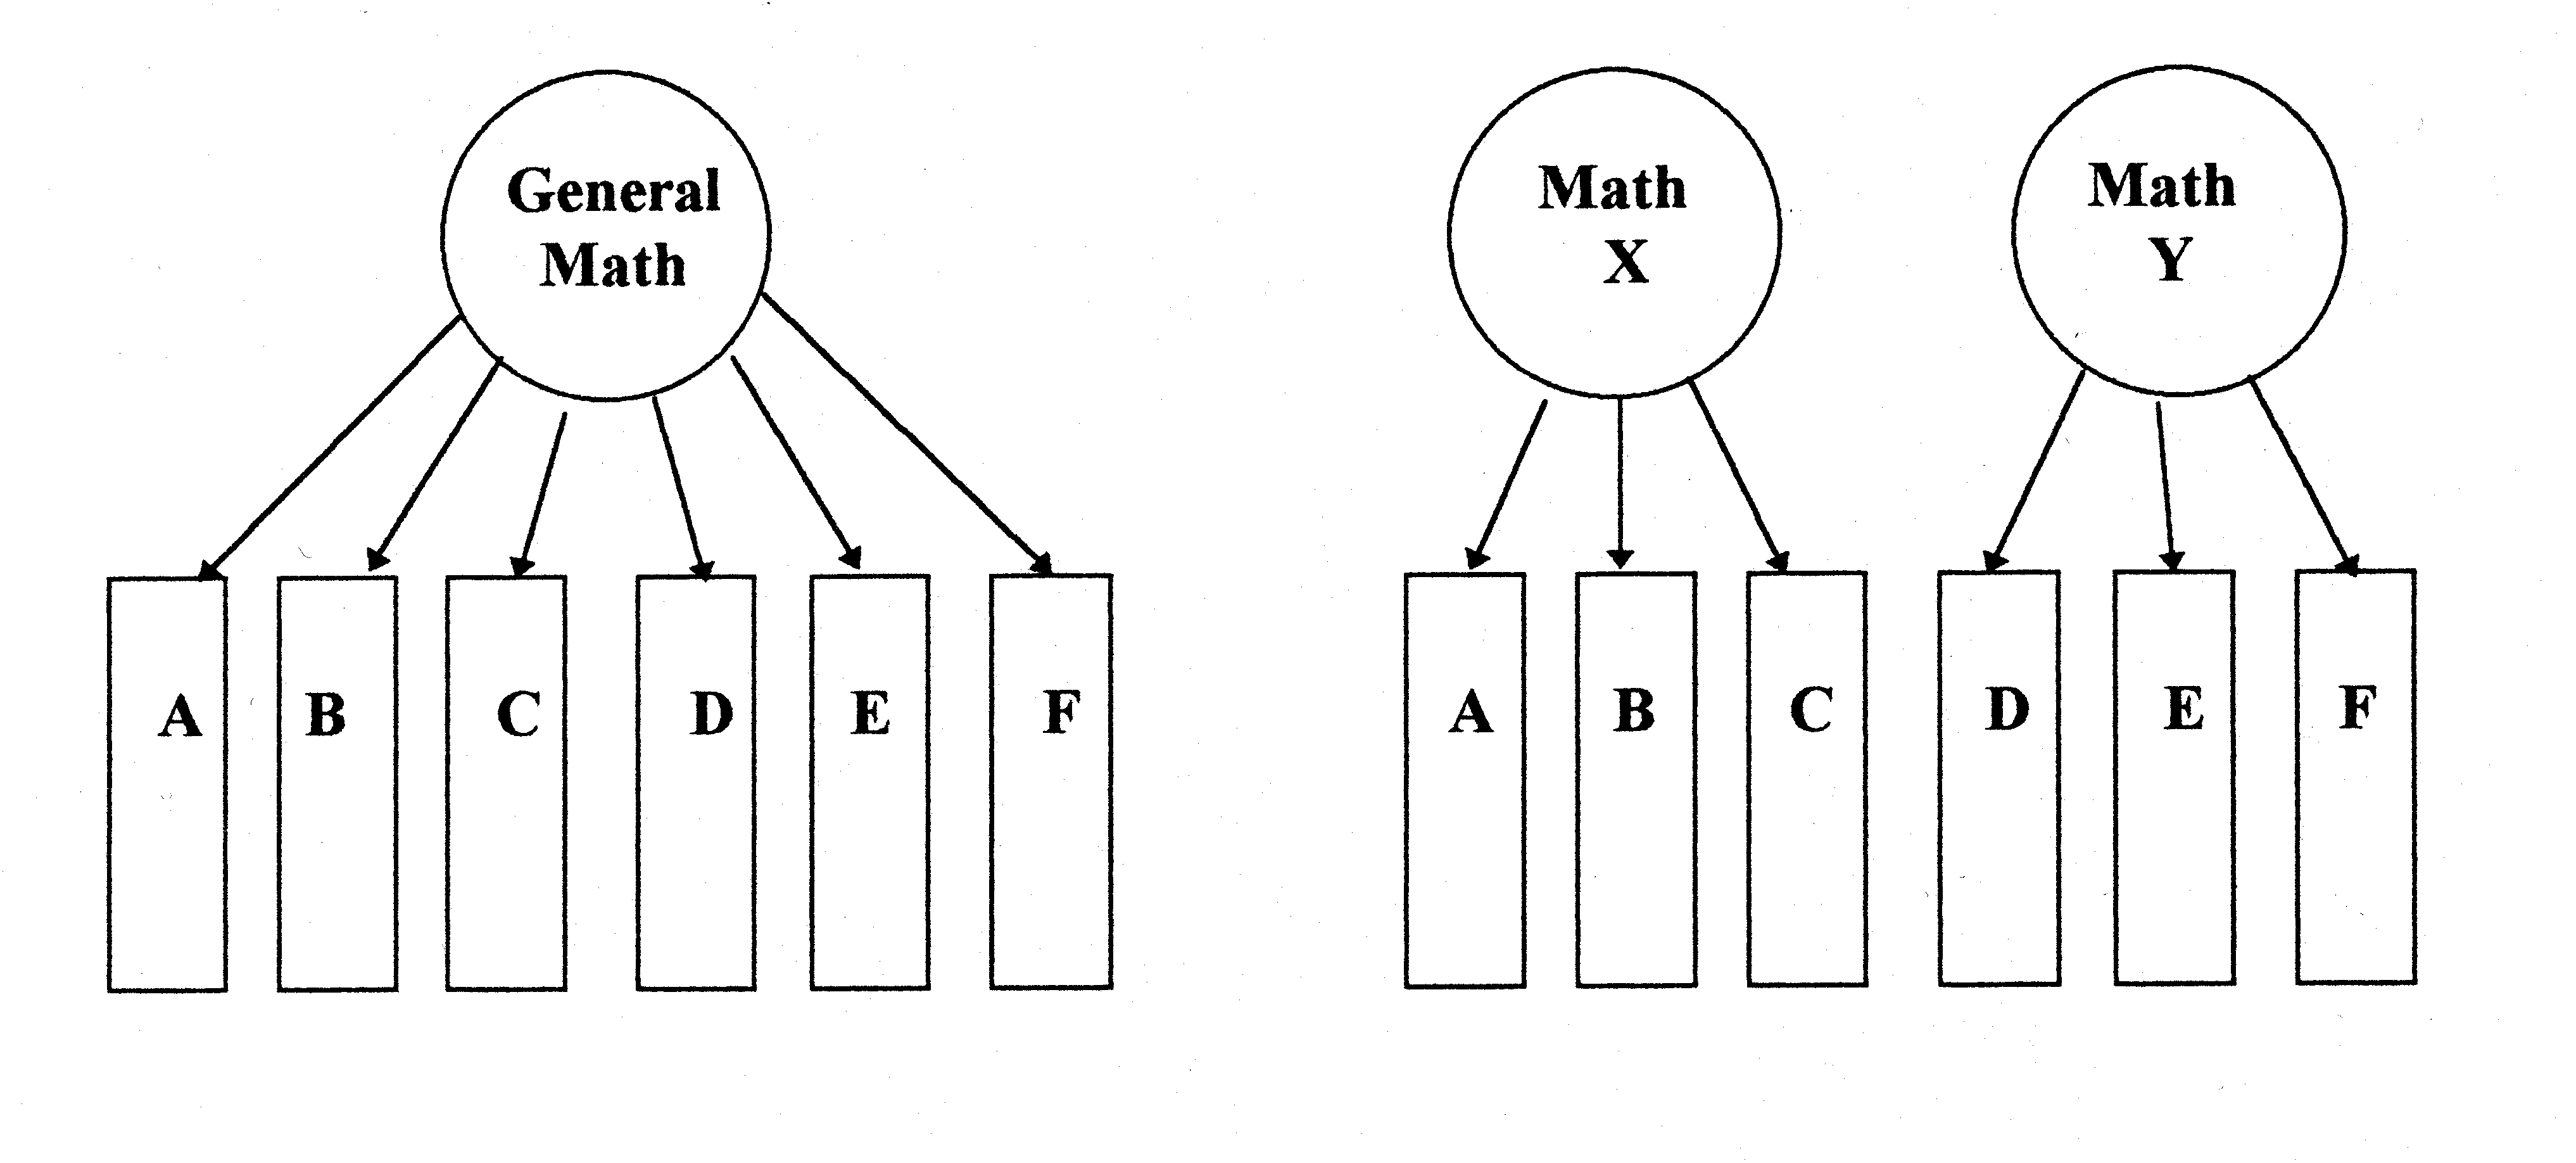 Figure 3. Factor Analysis Models Indicating Different Factor Structures for Standard and Accommodated Administrations